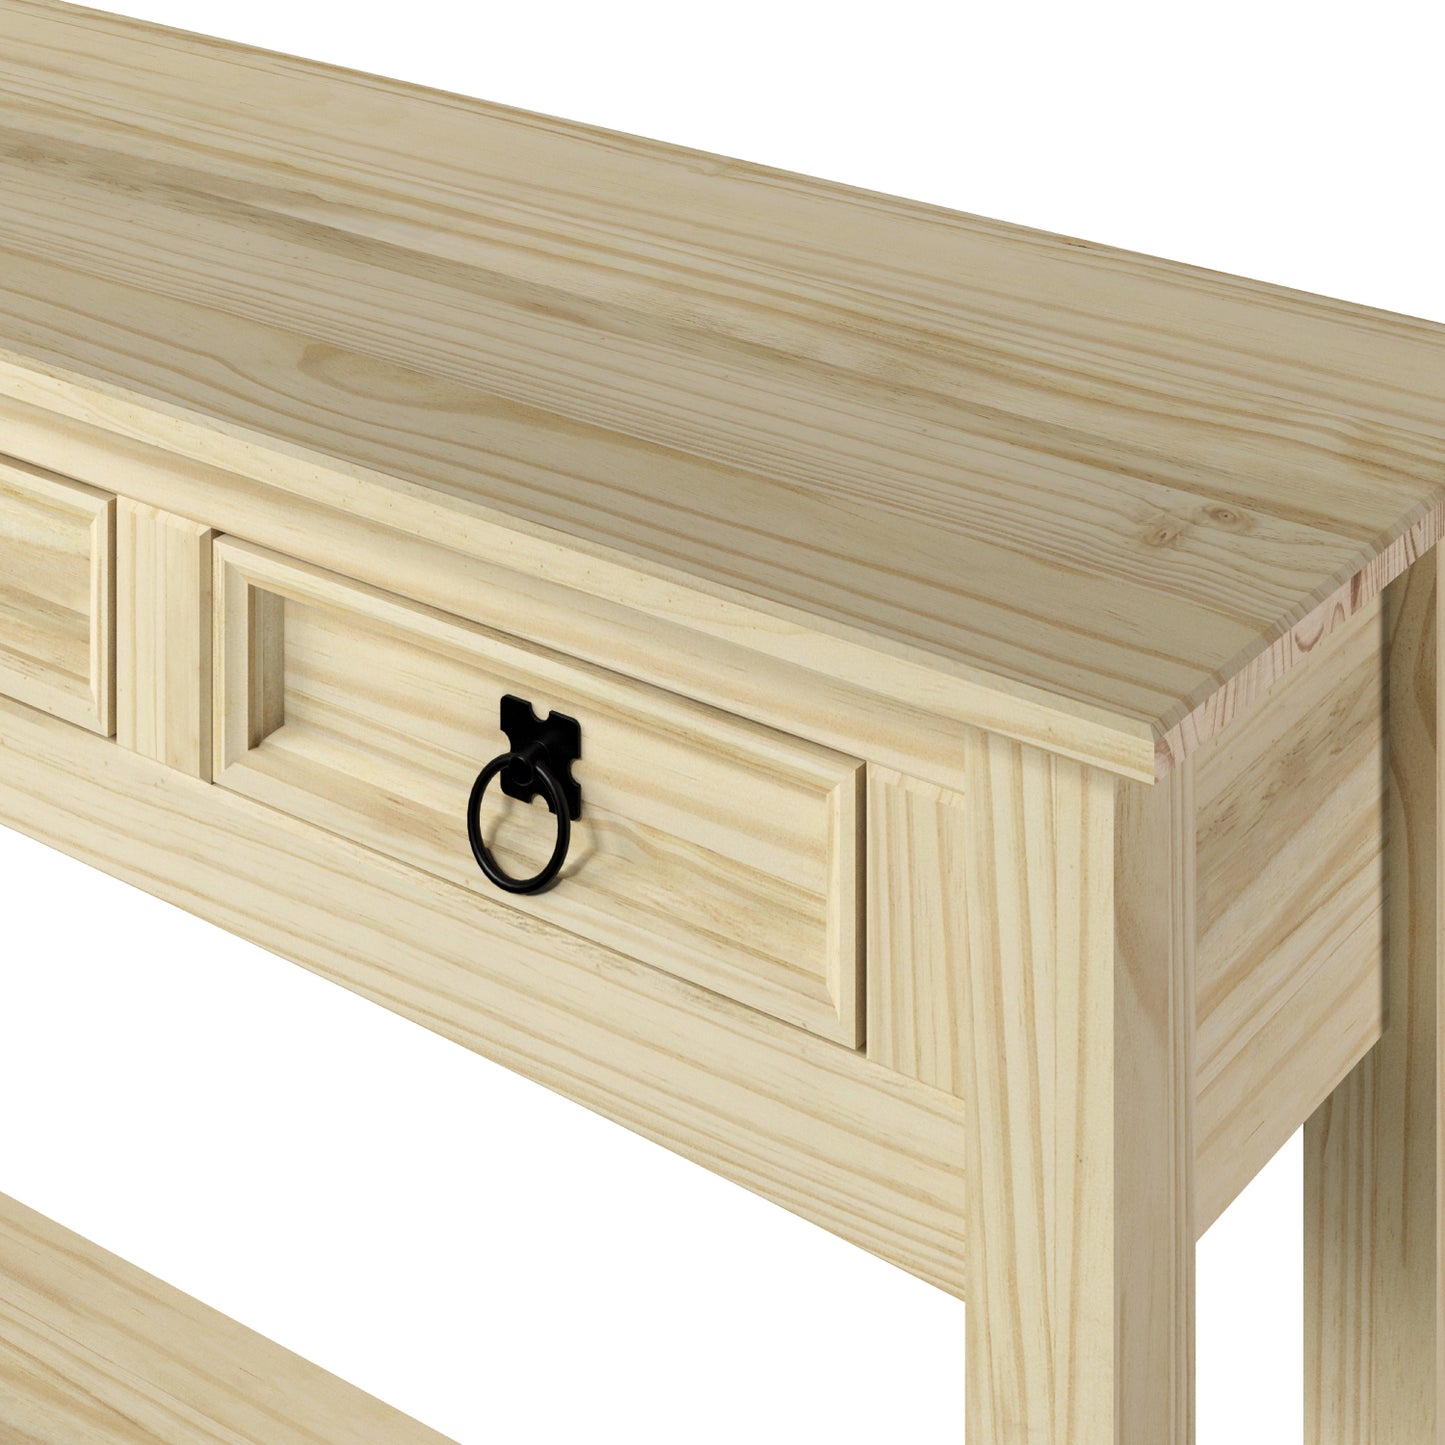 Wood Hall Table Console 3 Drawers Barewood | Furniture Dash